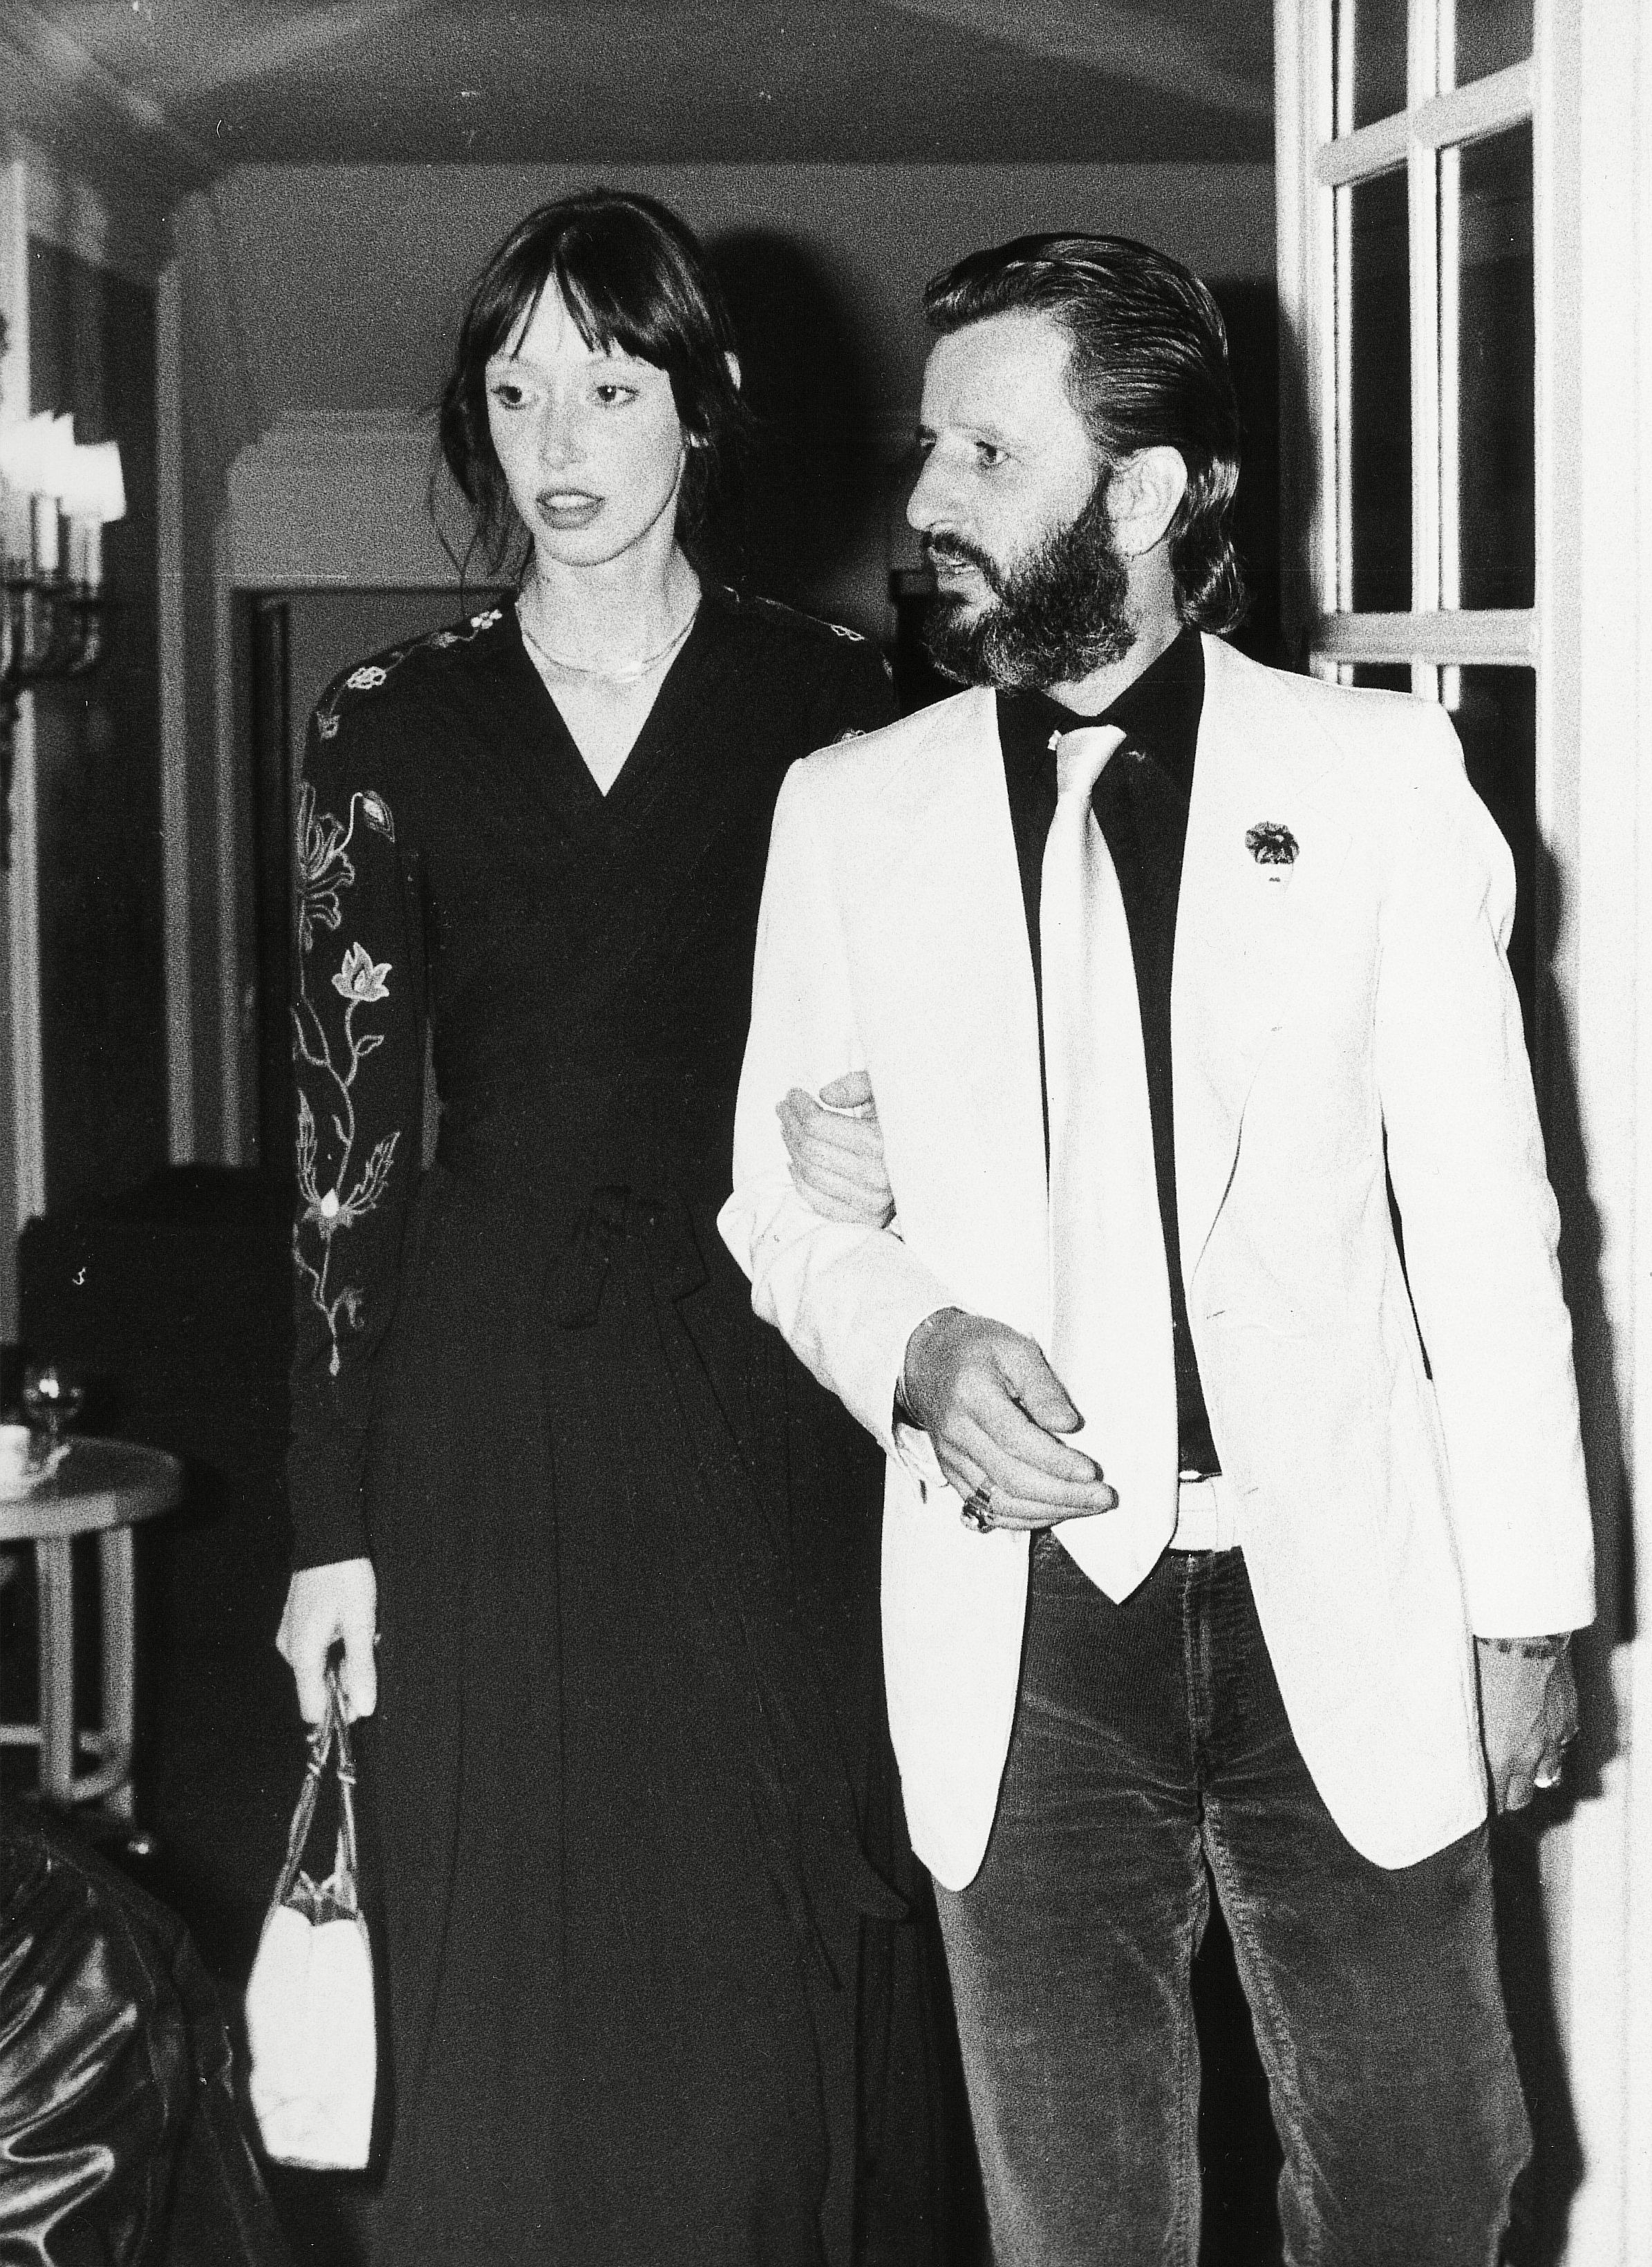 Shelley dated Beatles drummer Ringo Starr in the late 1970s